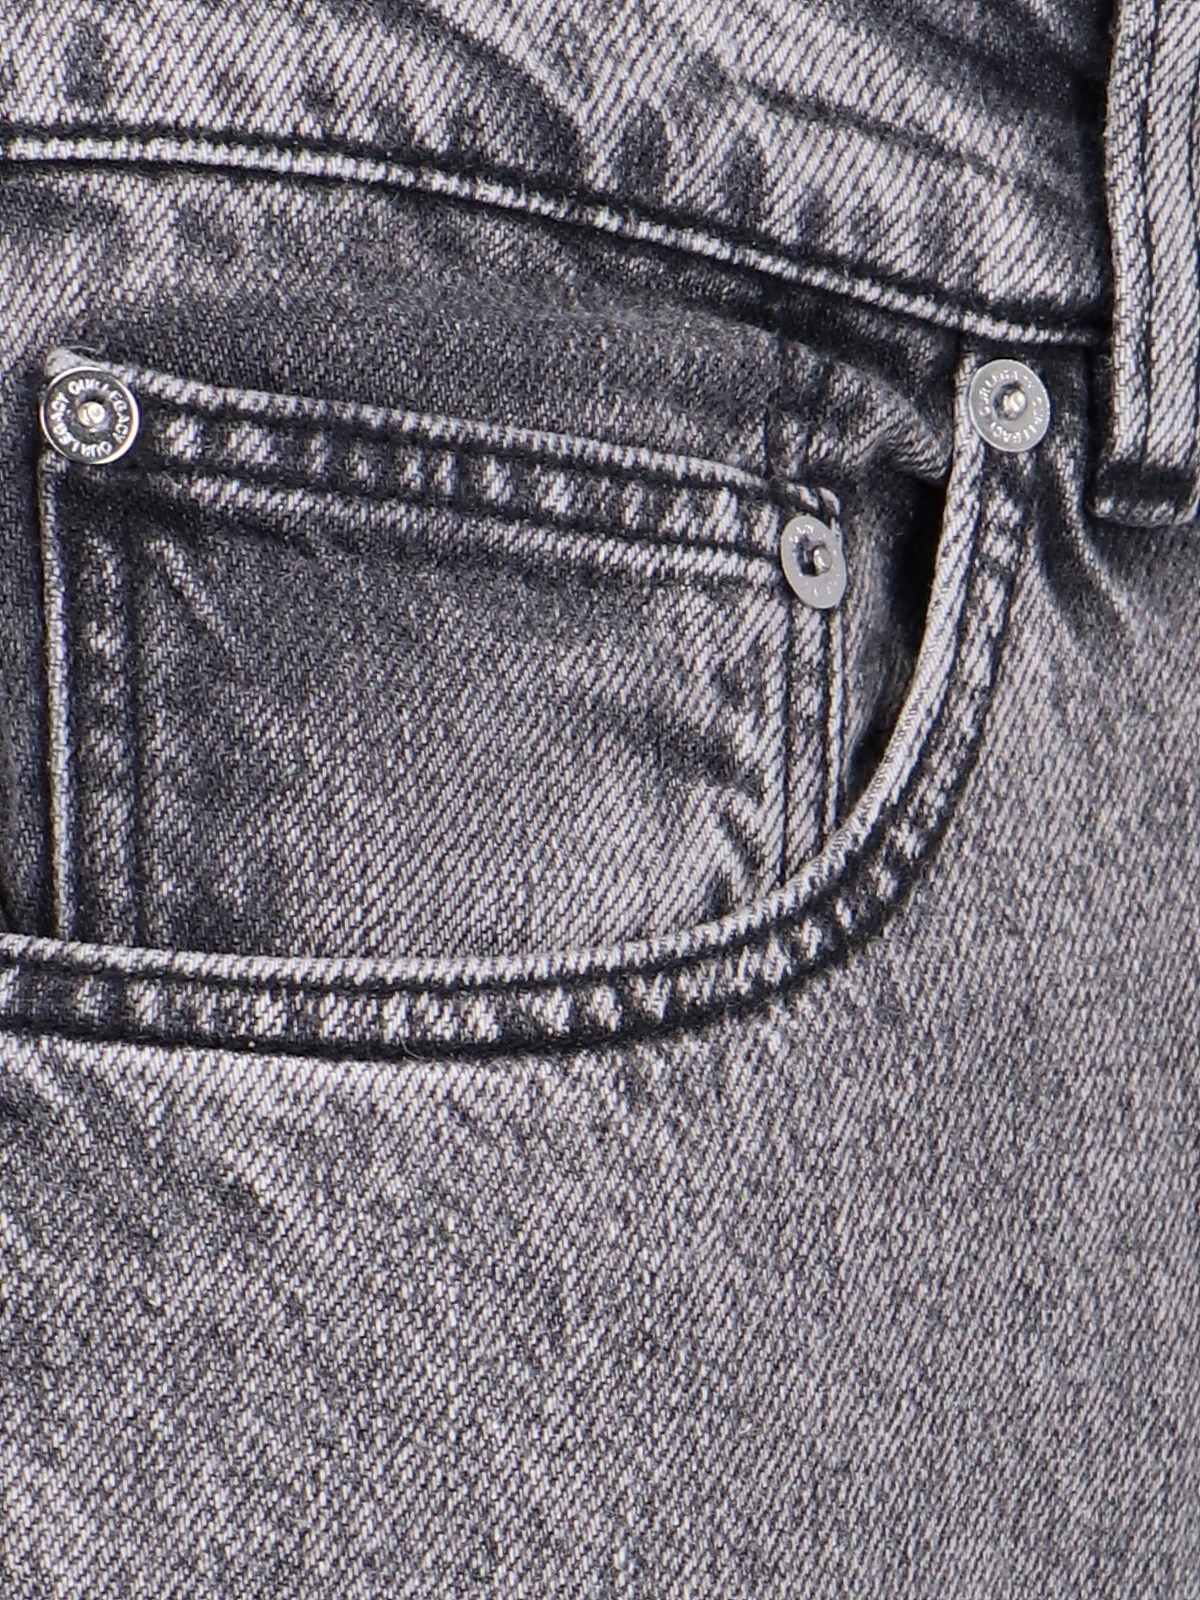 "EXTENDED THIRD CUT" JEANS - 4